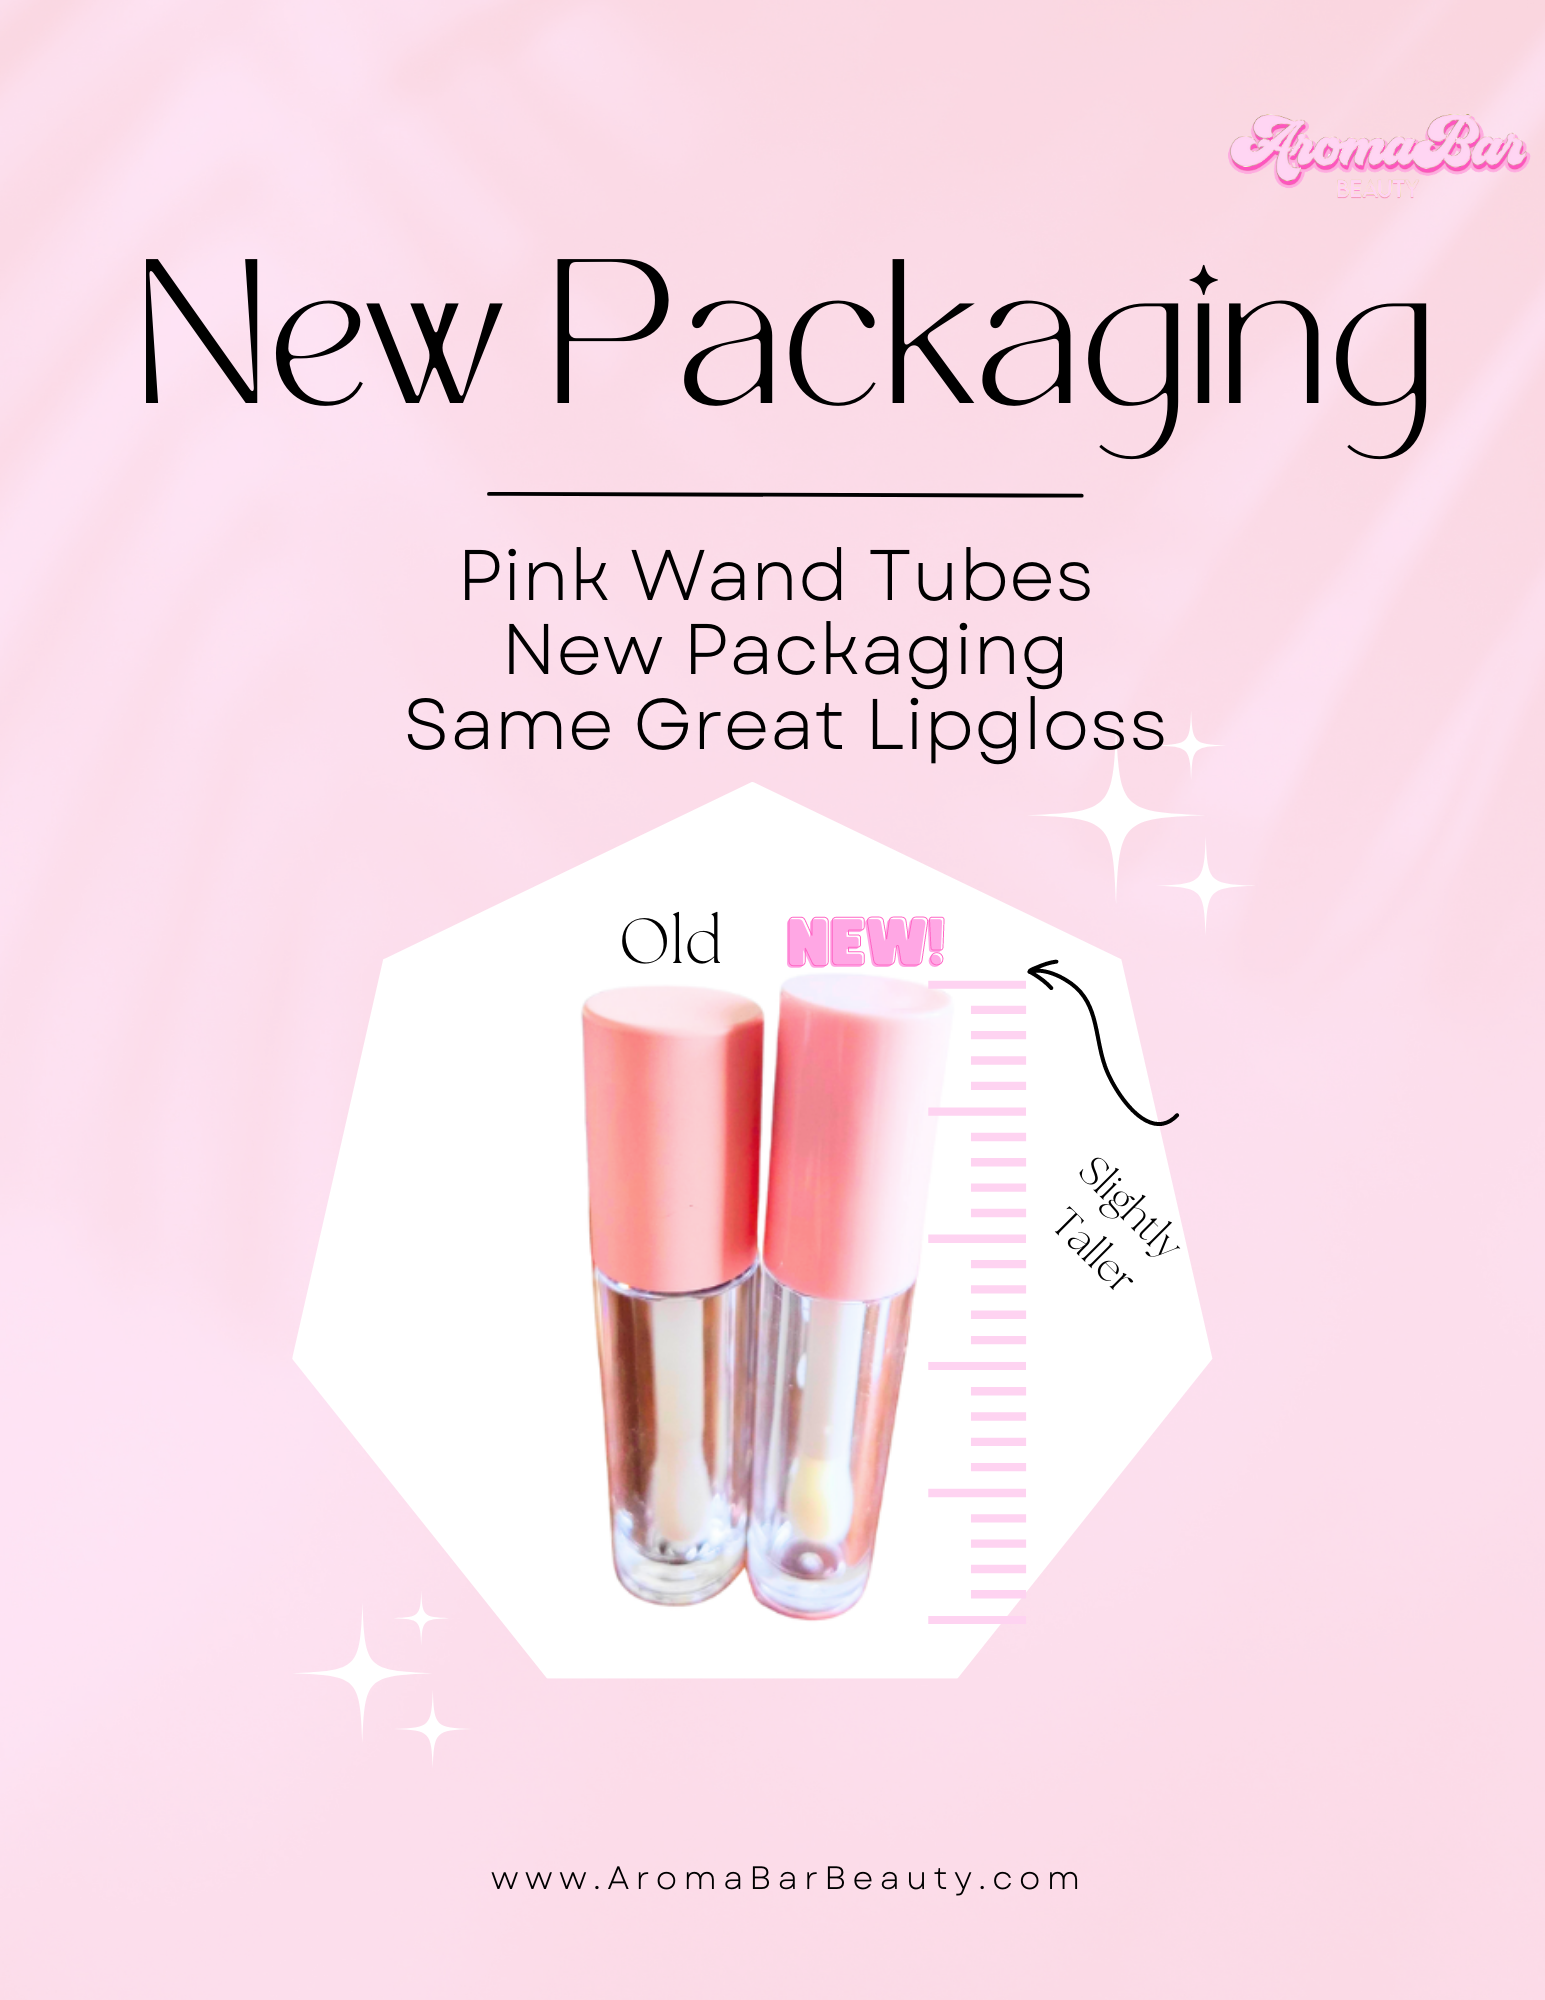 Perfect Pink Bundle 3 Shades of Pink Liquid Lip Pigments Wholesale  Available 